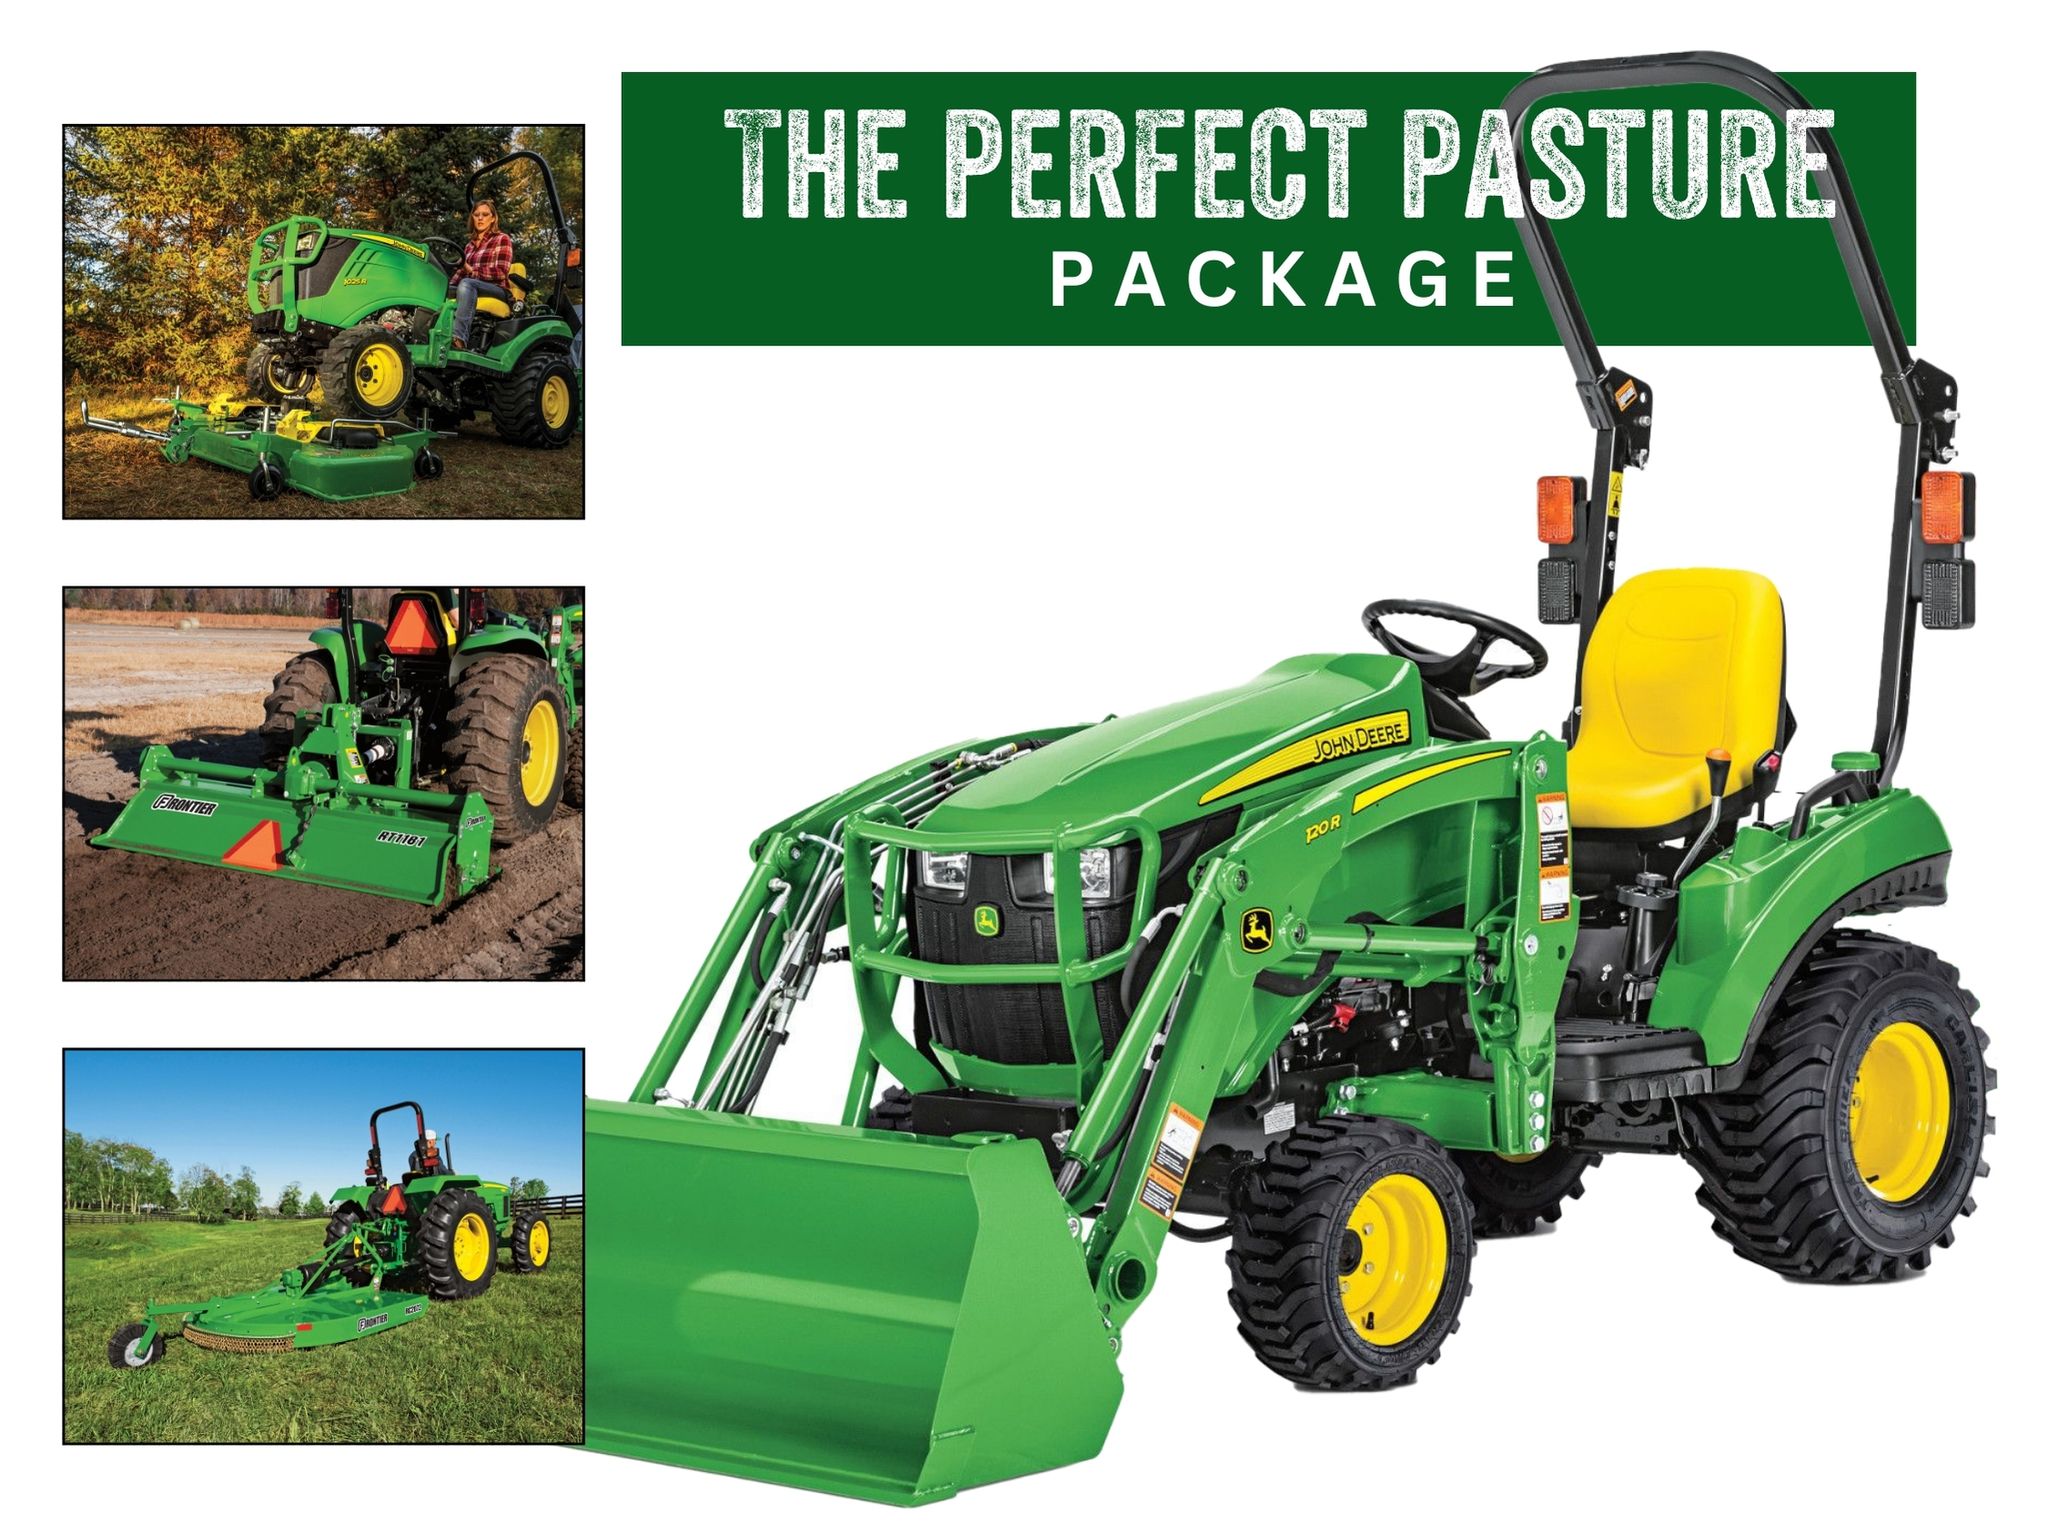 The Perfect Pasture Package